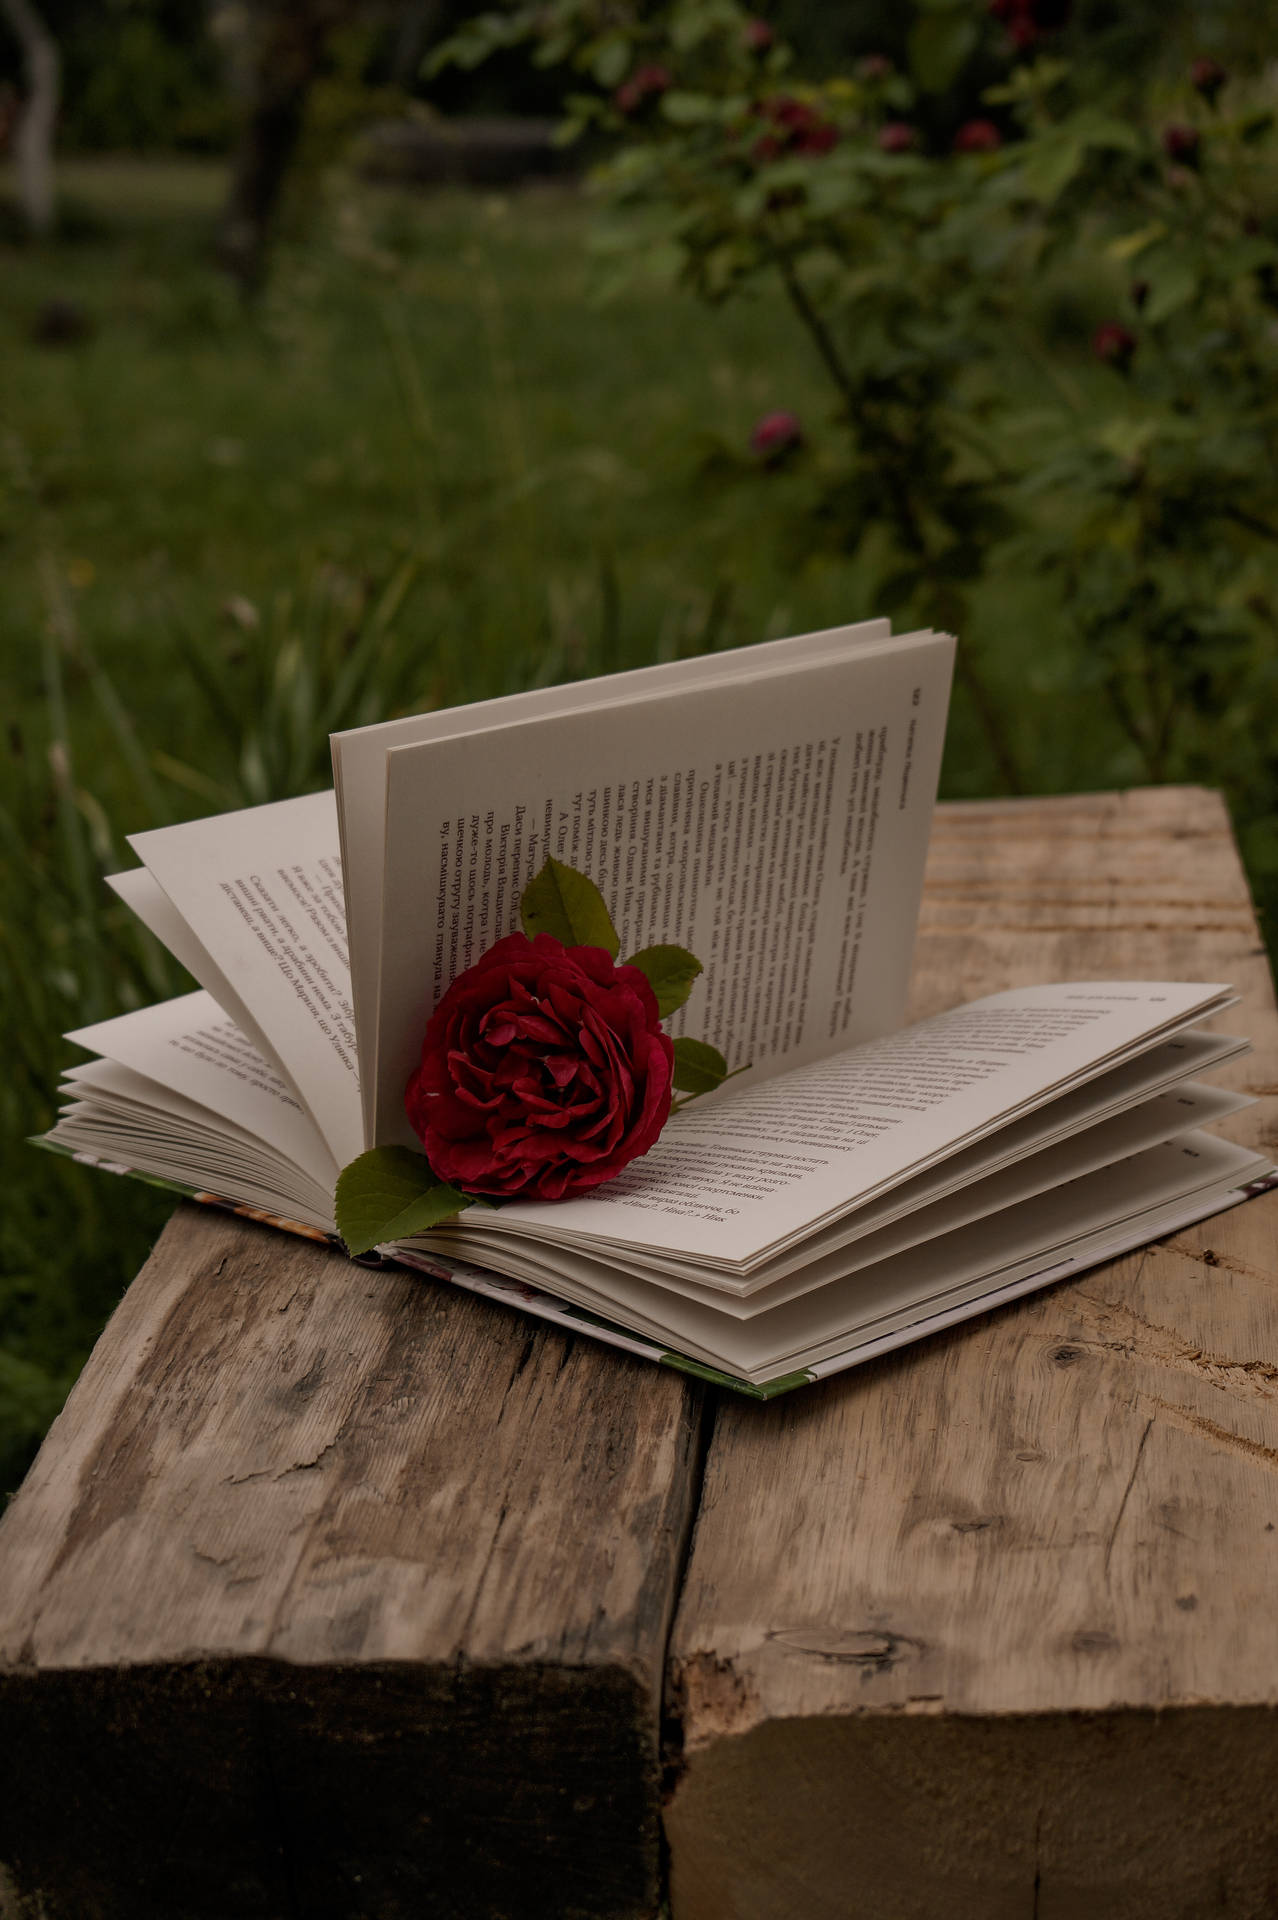 A book with a red rose on top of it - Books